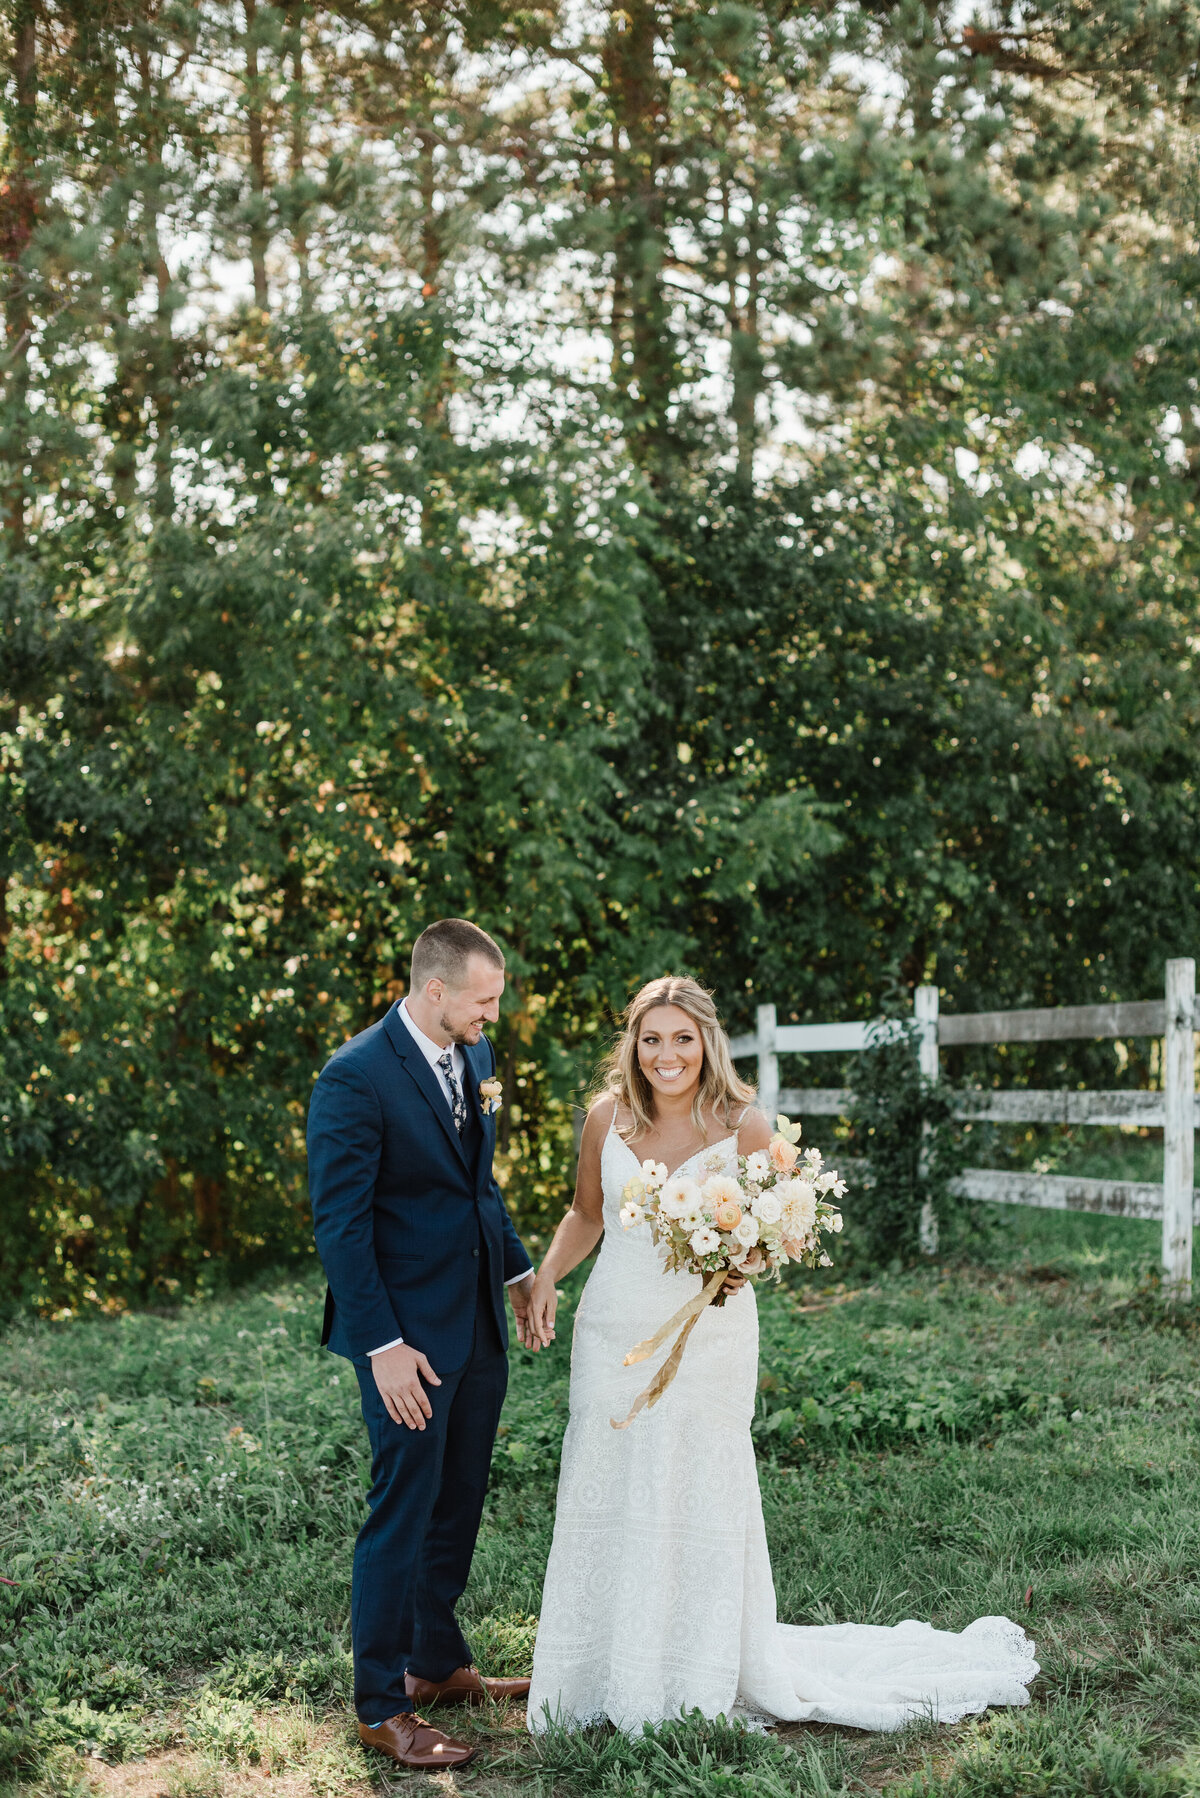 Sarah & Mike, September 19 2020 - Annmarie Swift Photography-68